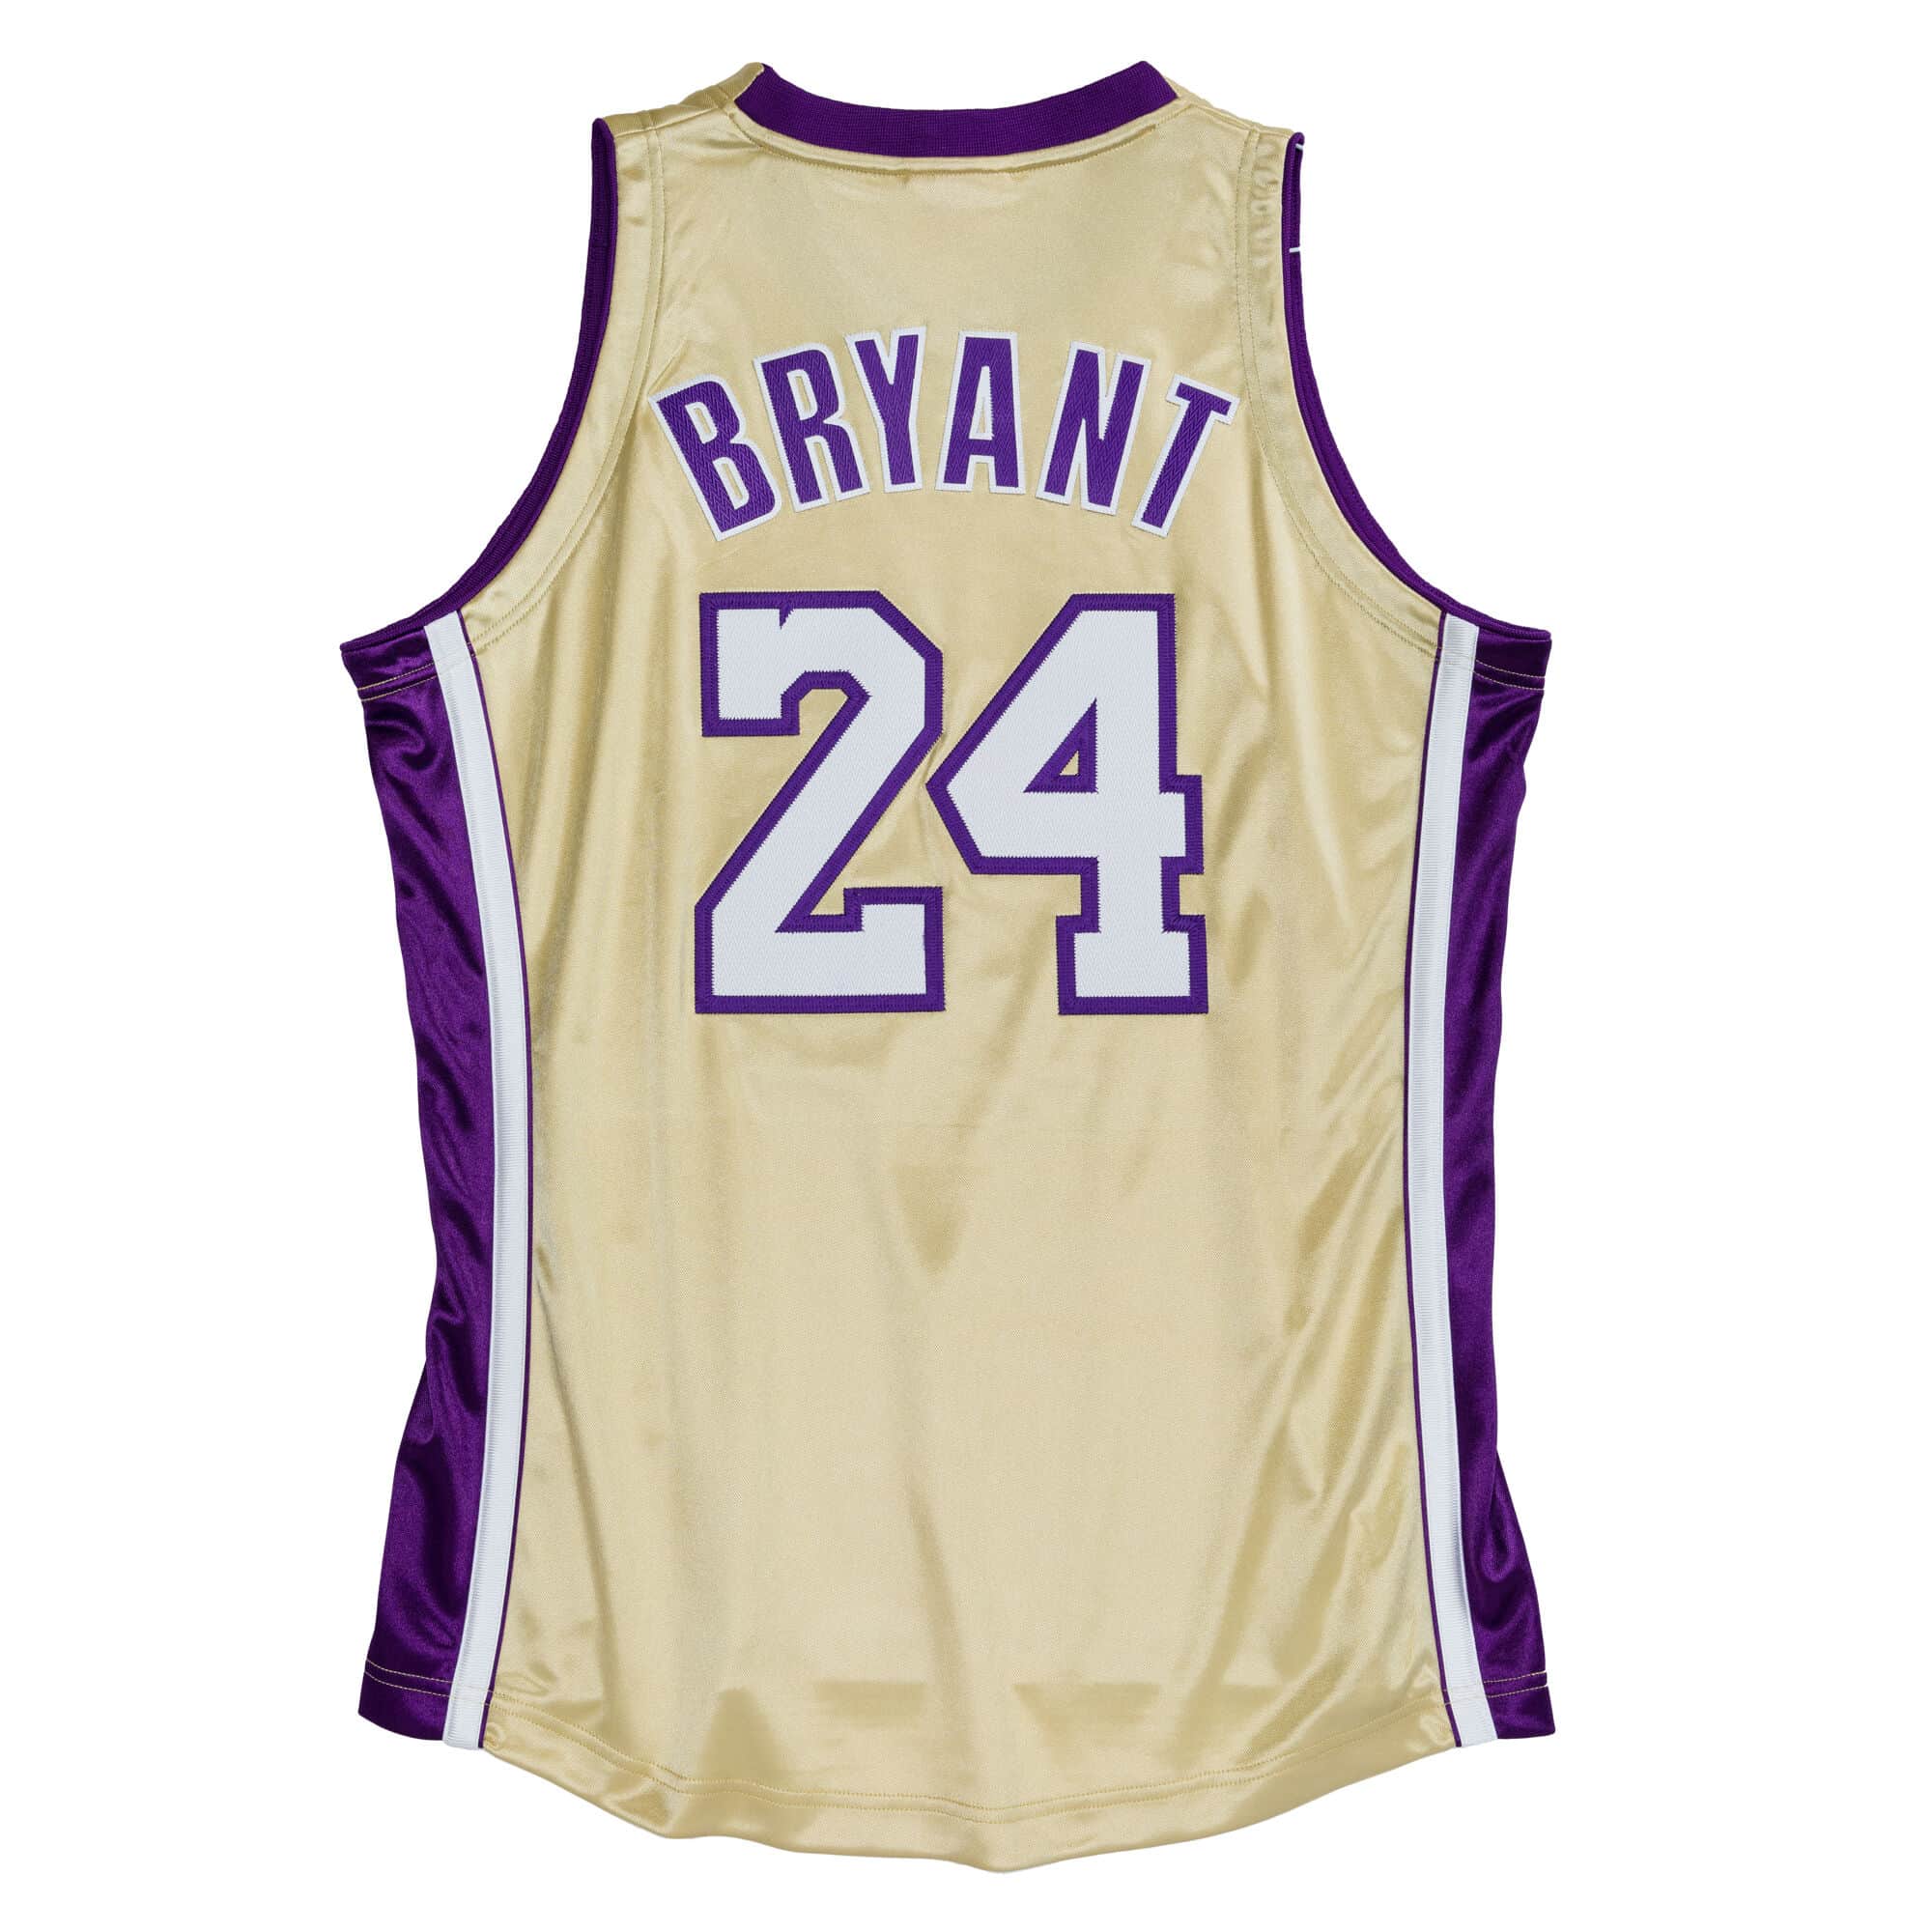 Kobe Bryant's Iconic 8 And 24 Jersey Numbers Honored On This